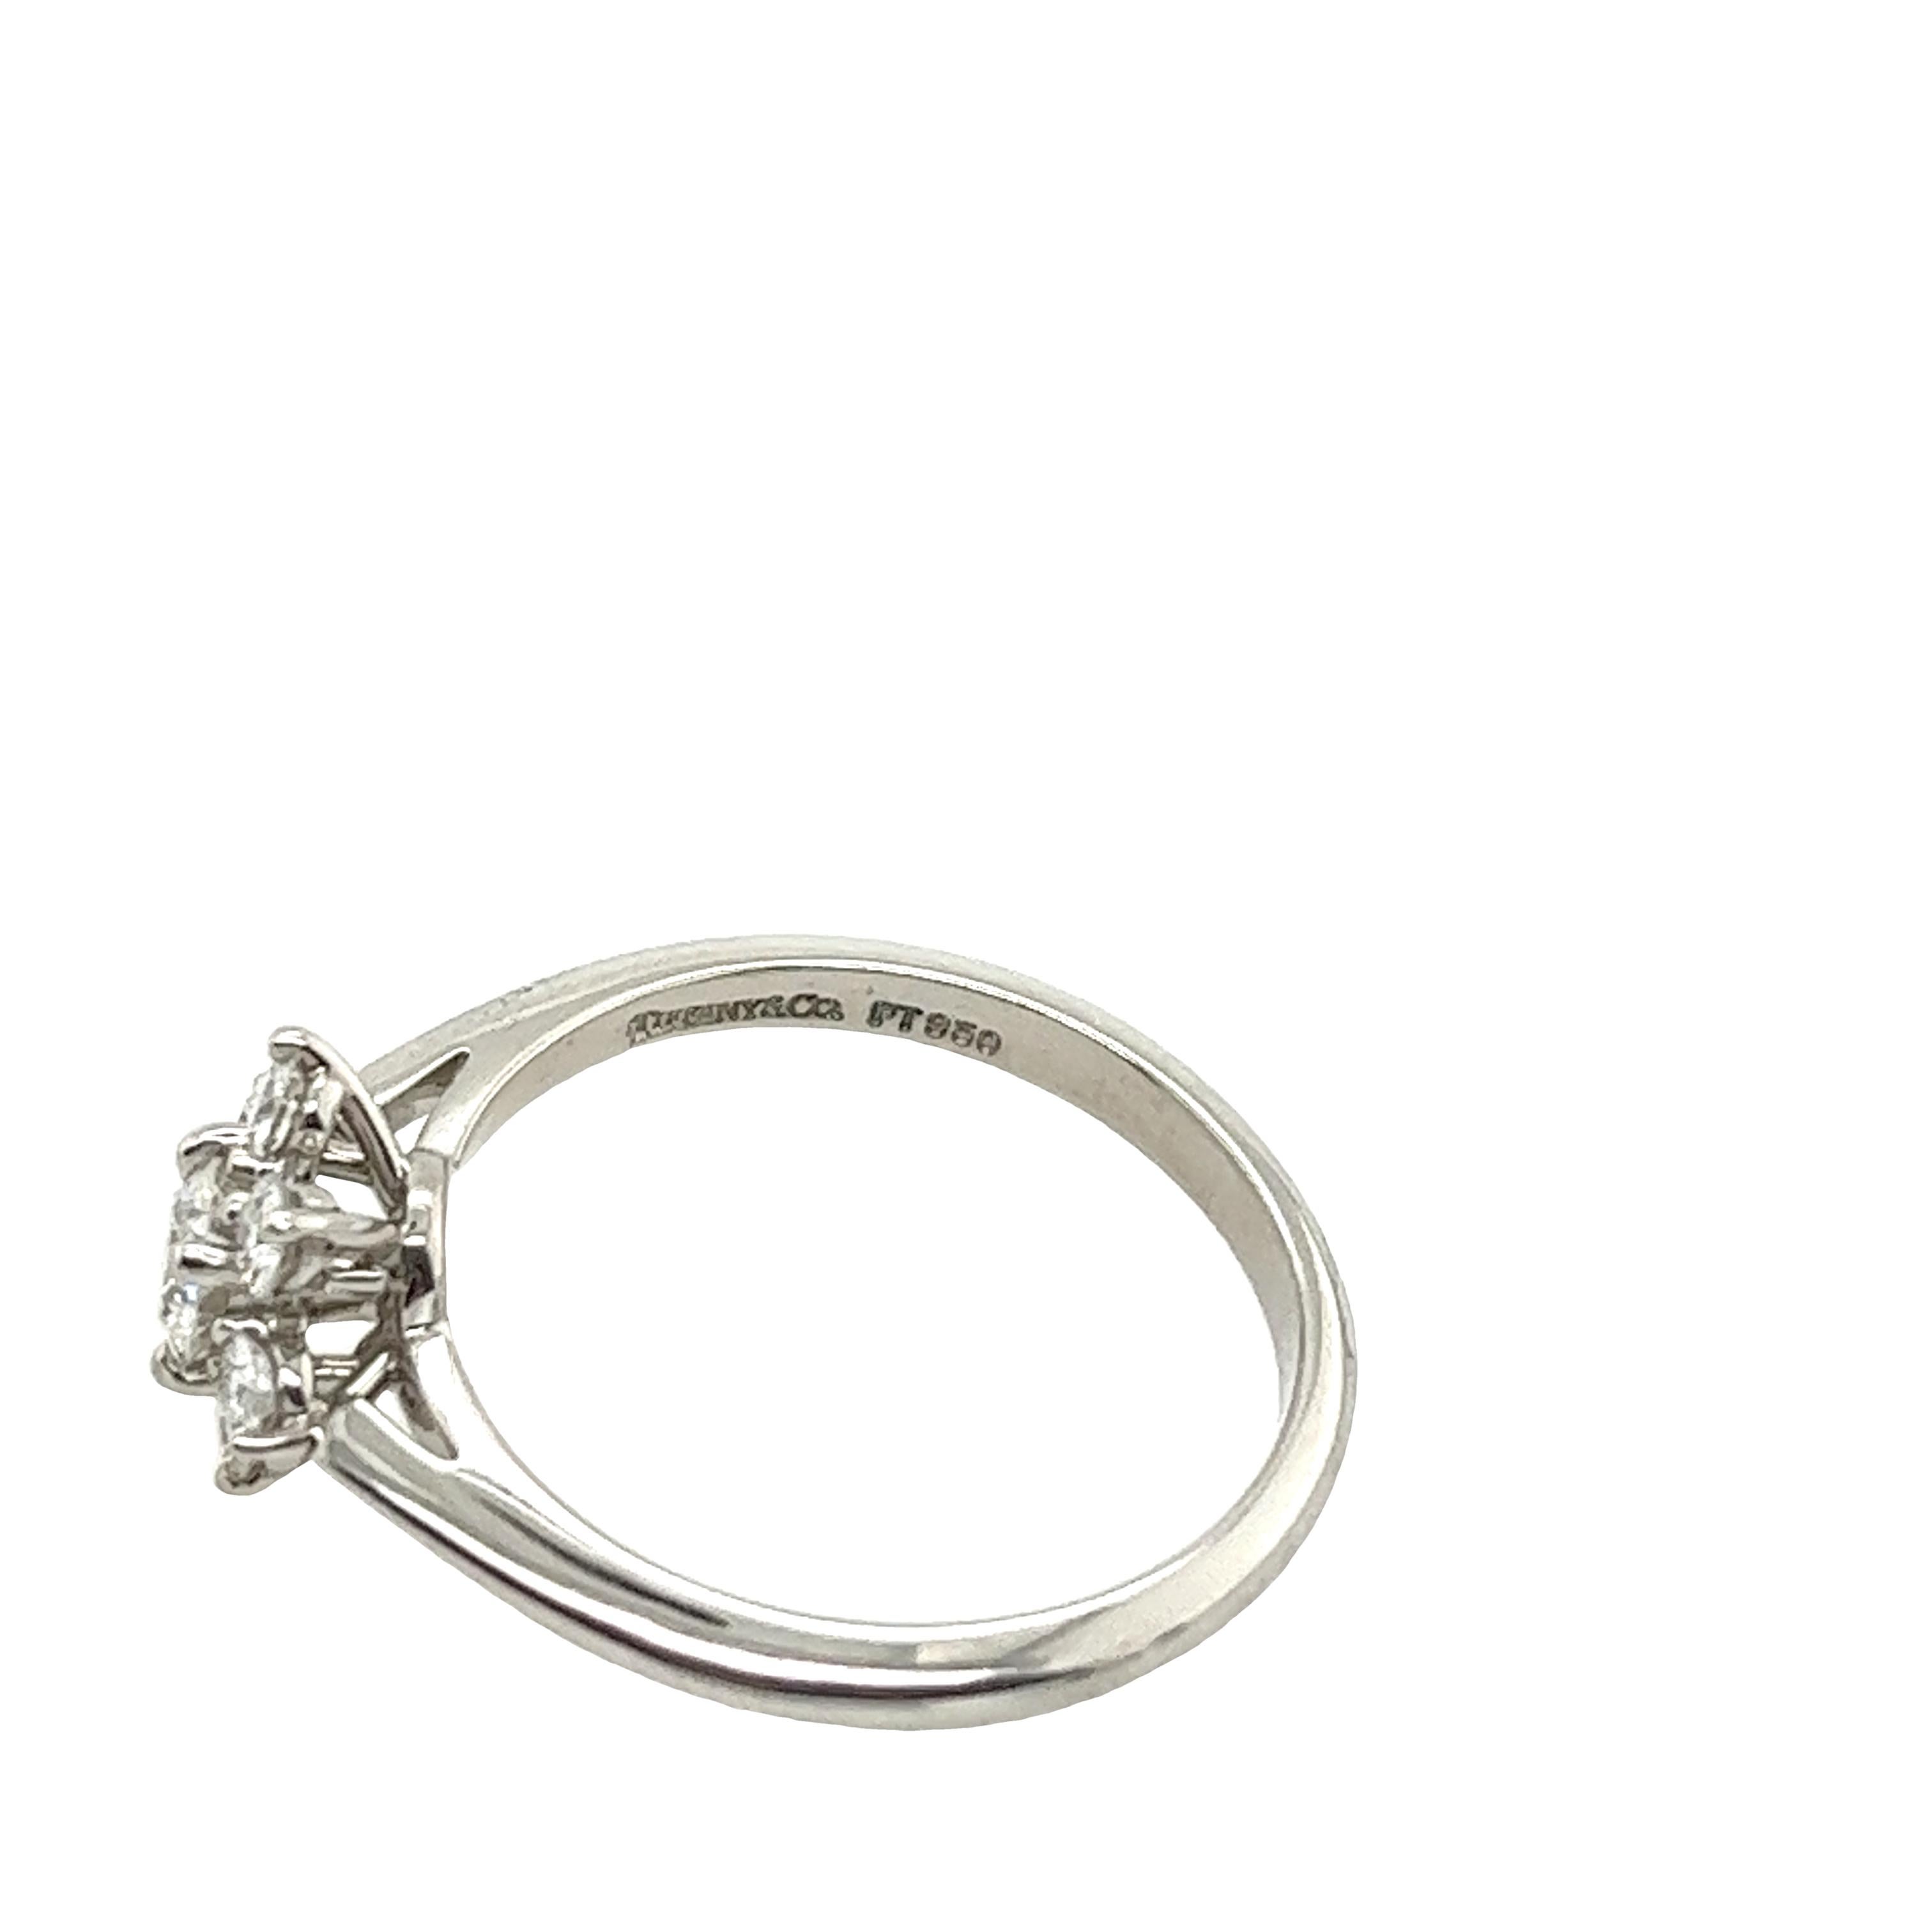 Embrace unparalleled elegance with the Tiffany & Co. Platinum Diamond Cluster Ring. This exquisite piece features seven round diamonds totaling 0.45 carats, graded at G/VS for exceptional quality. Set in platinum, the diamonds form a captivating